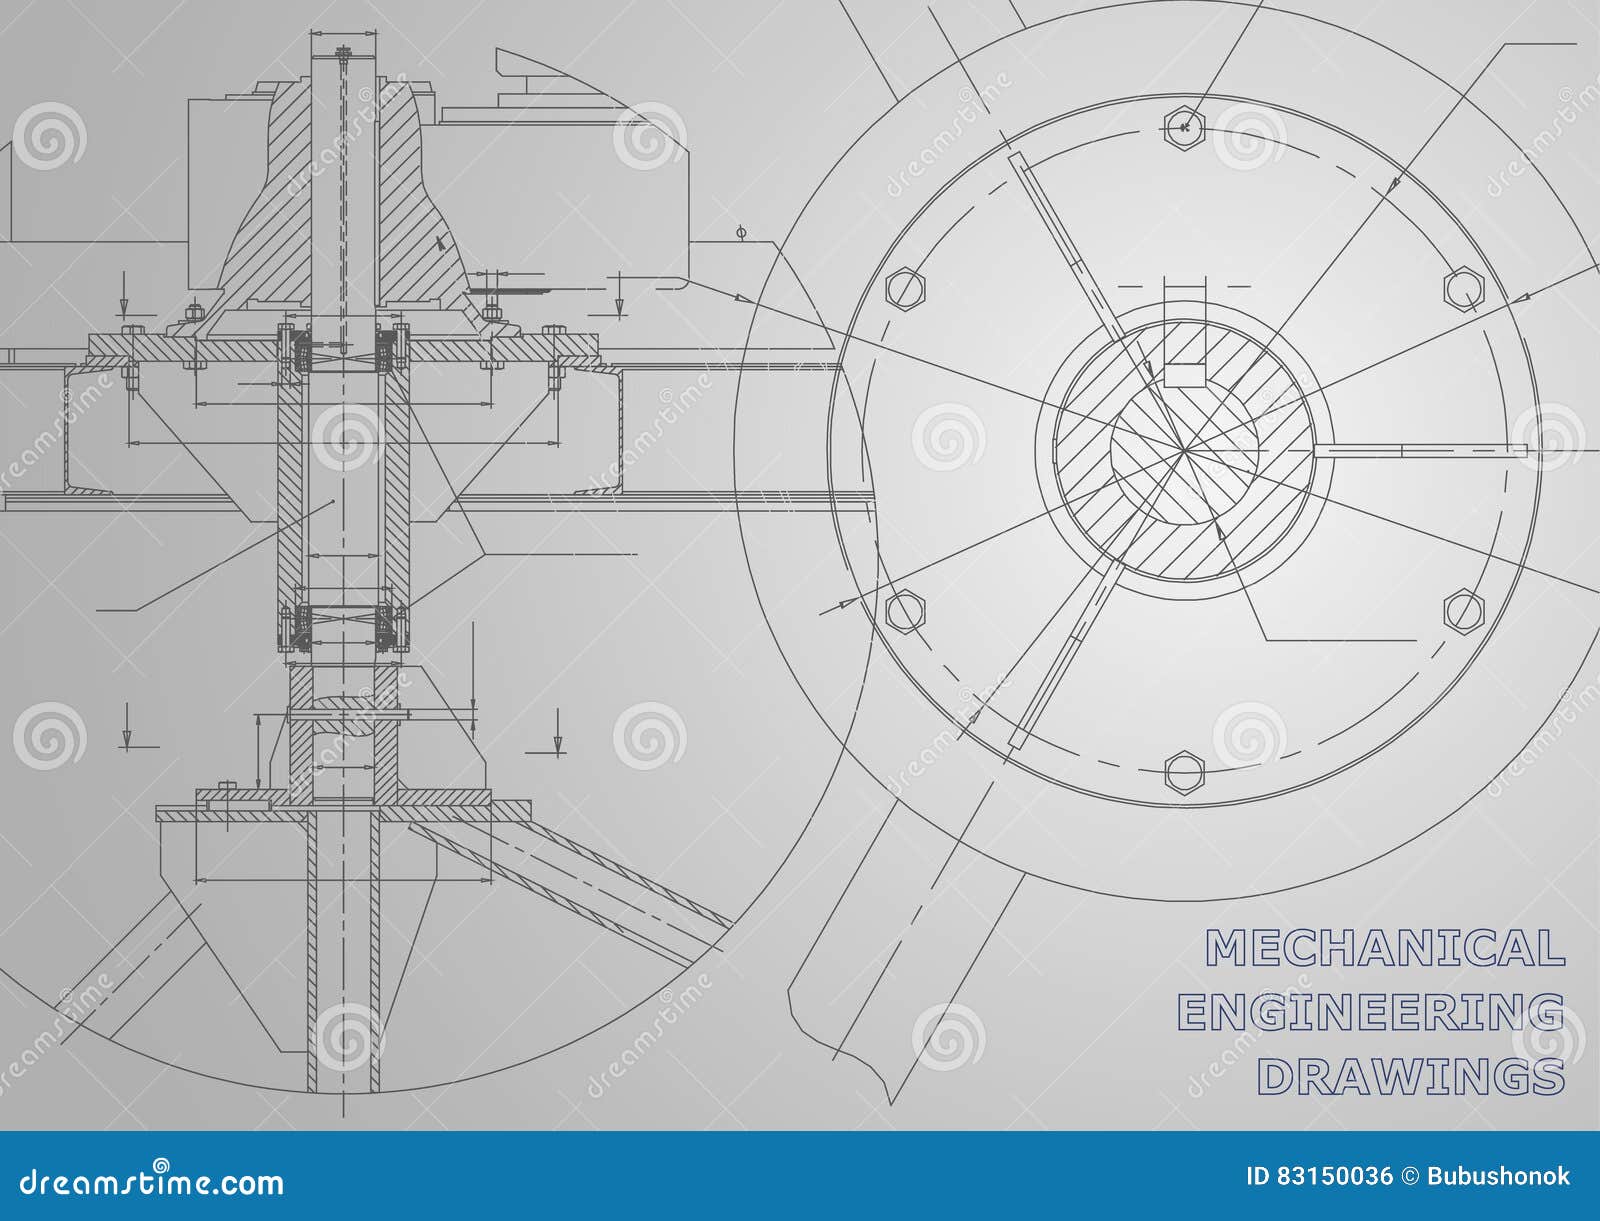 mechanical drawing067 | Technical illustration, Mechanical design, Mechanical  engineering design